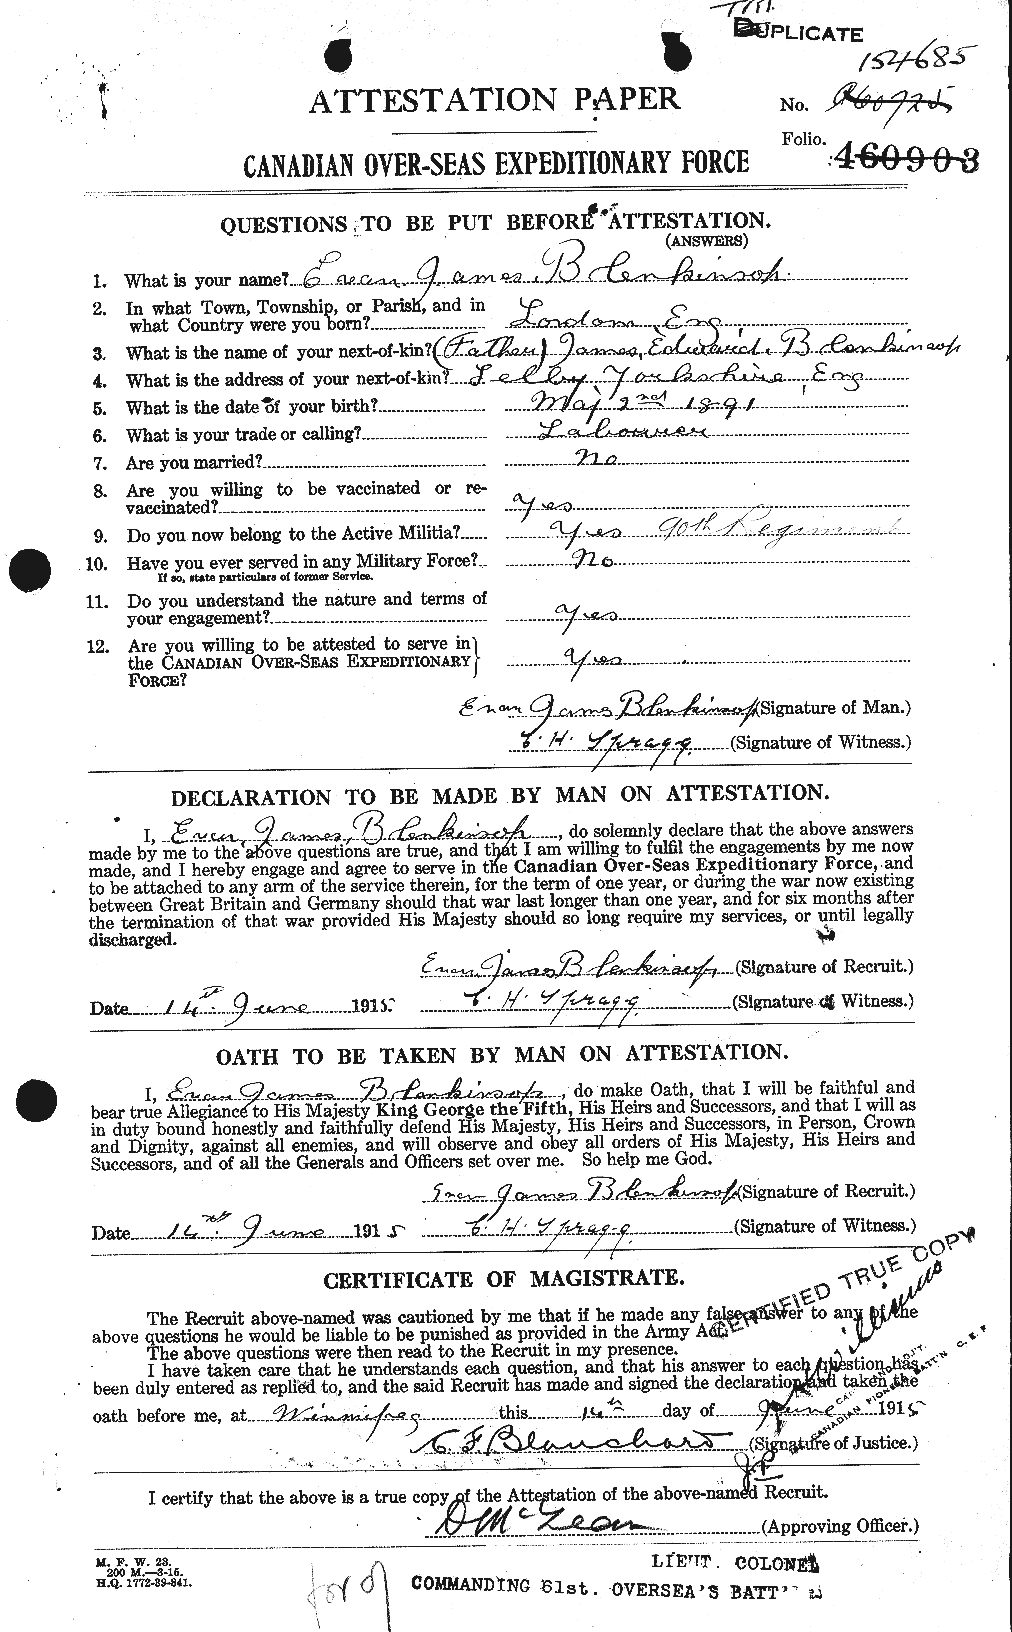 Personnel Records of the First World War - CEF 247990a